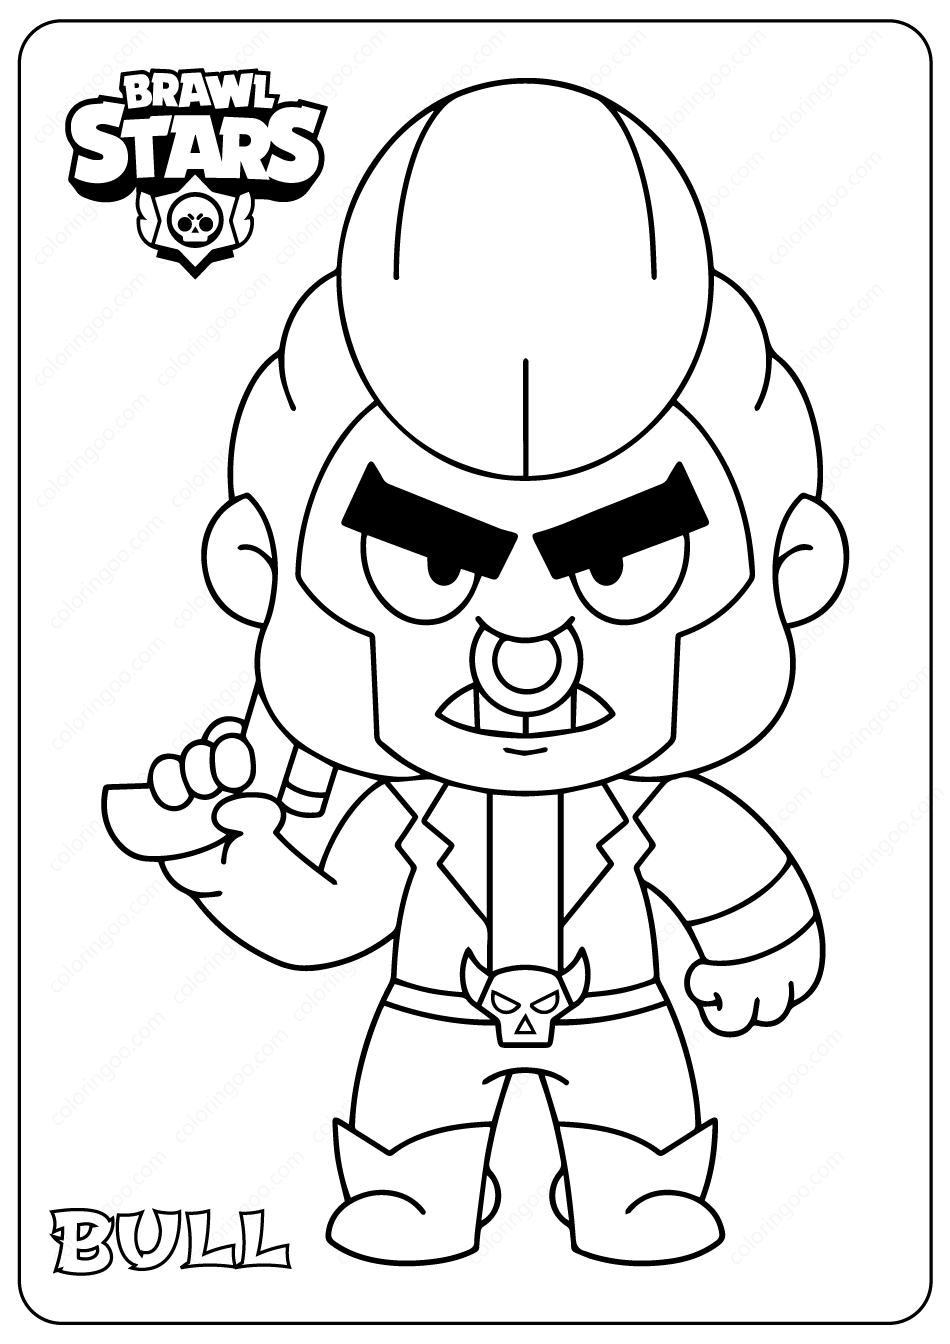 Brawl Stars Coloring Pages Coloring Home - coloriage brawl stars logo